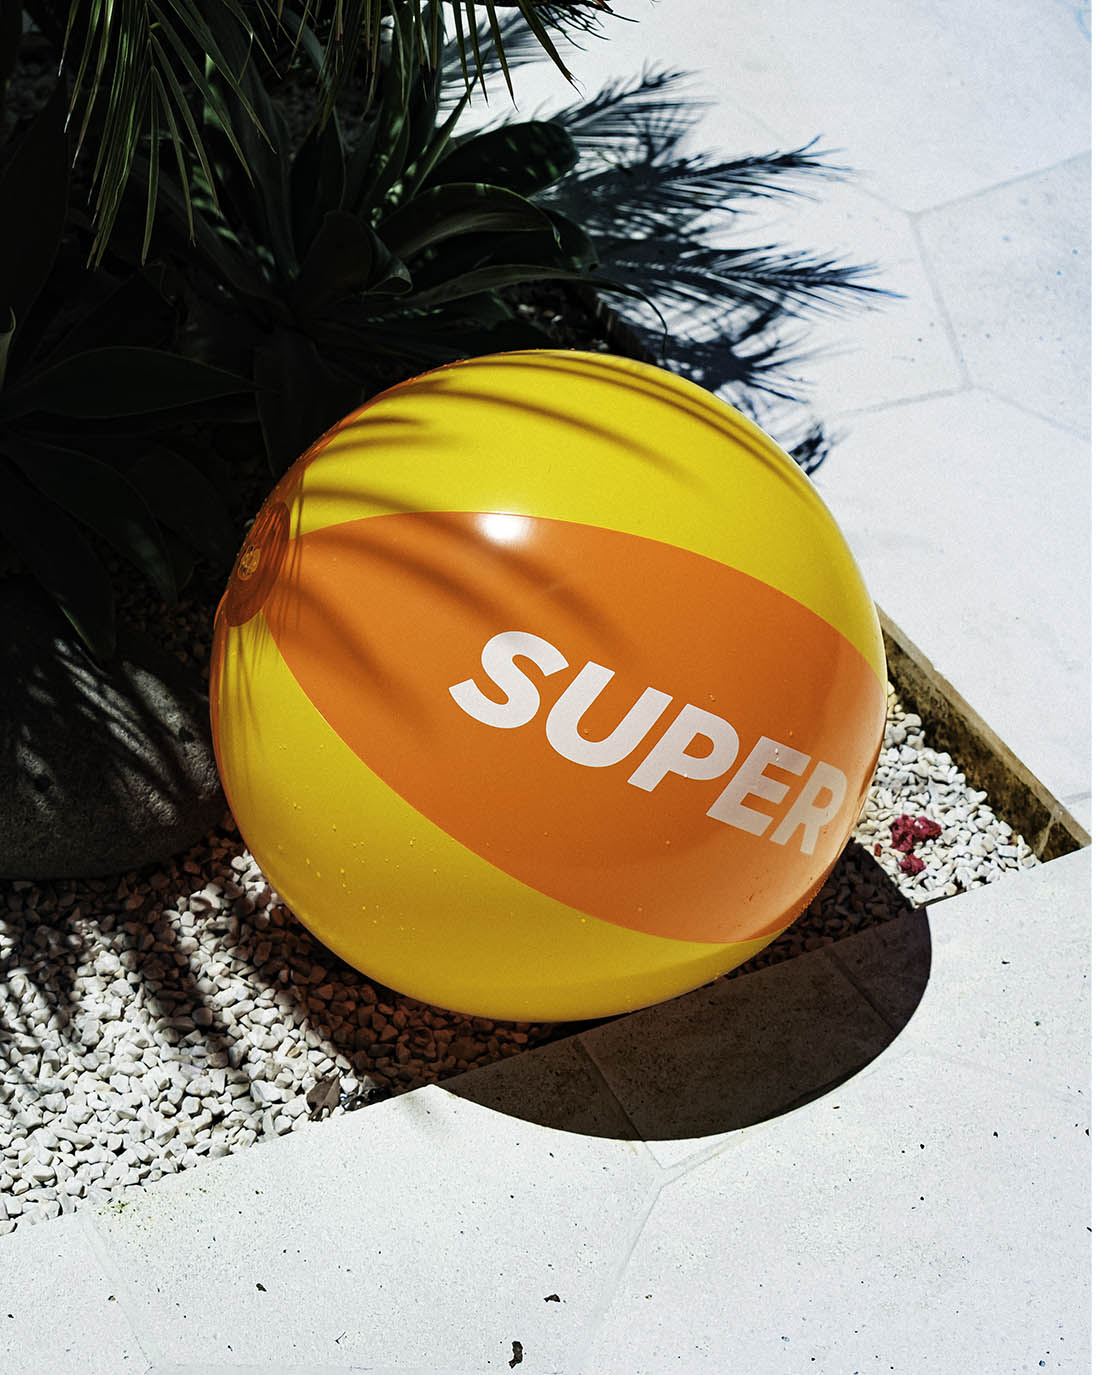 Beach ball with solid orange and yellow design.